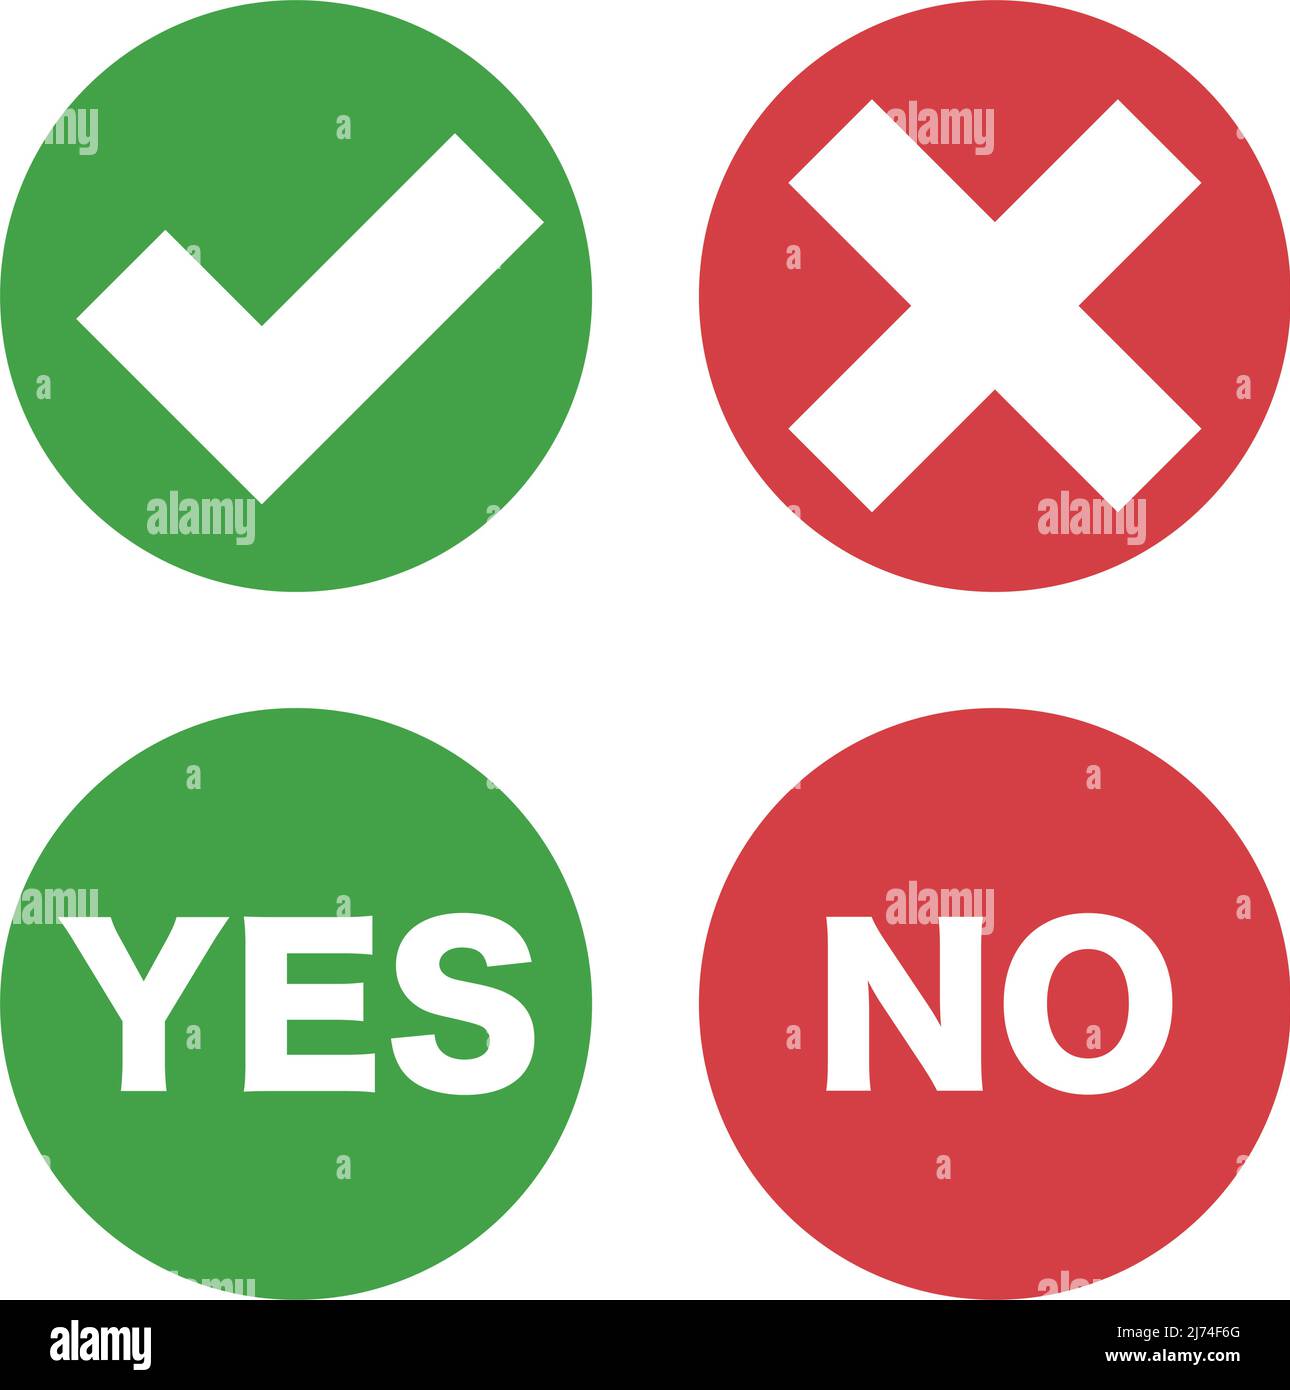 Check mark and cross mark, yes and no icon set. Success or failure. Editable vector. Stock Vector